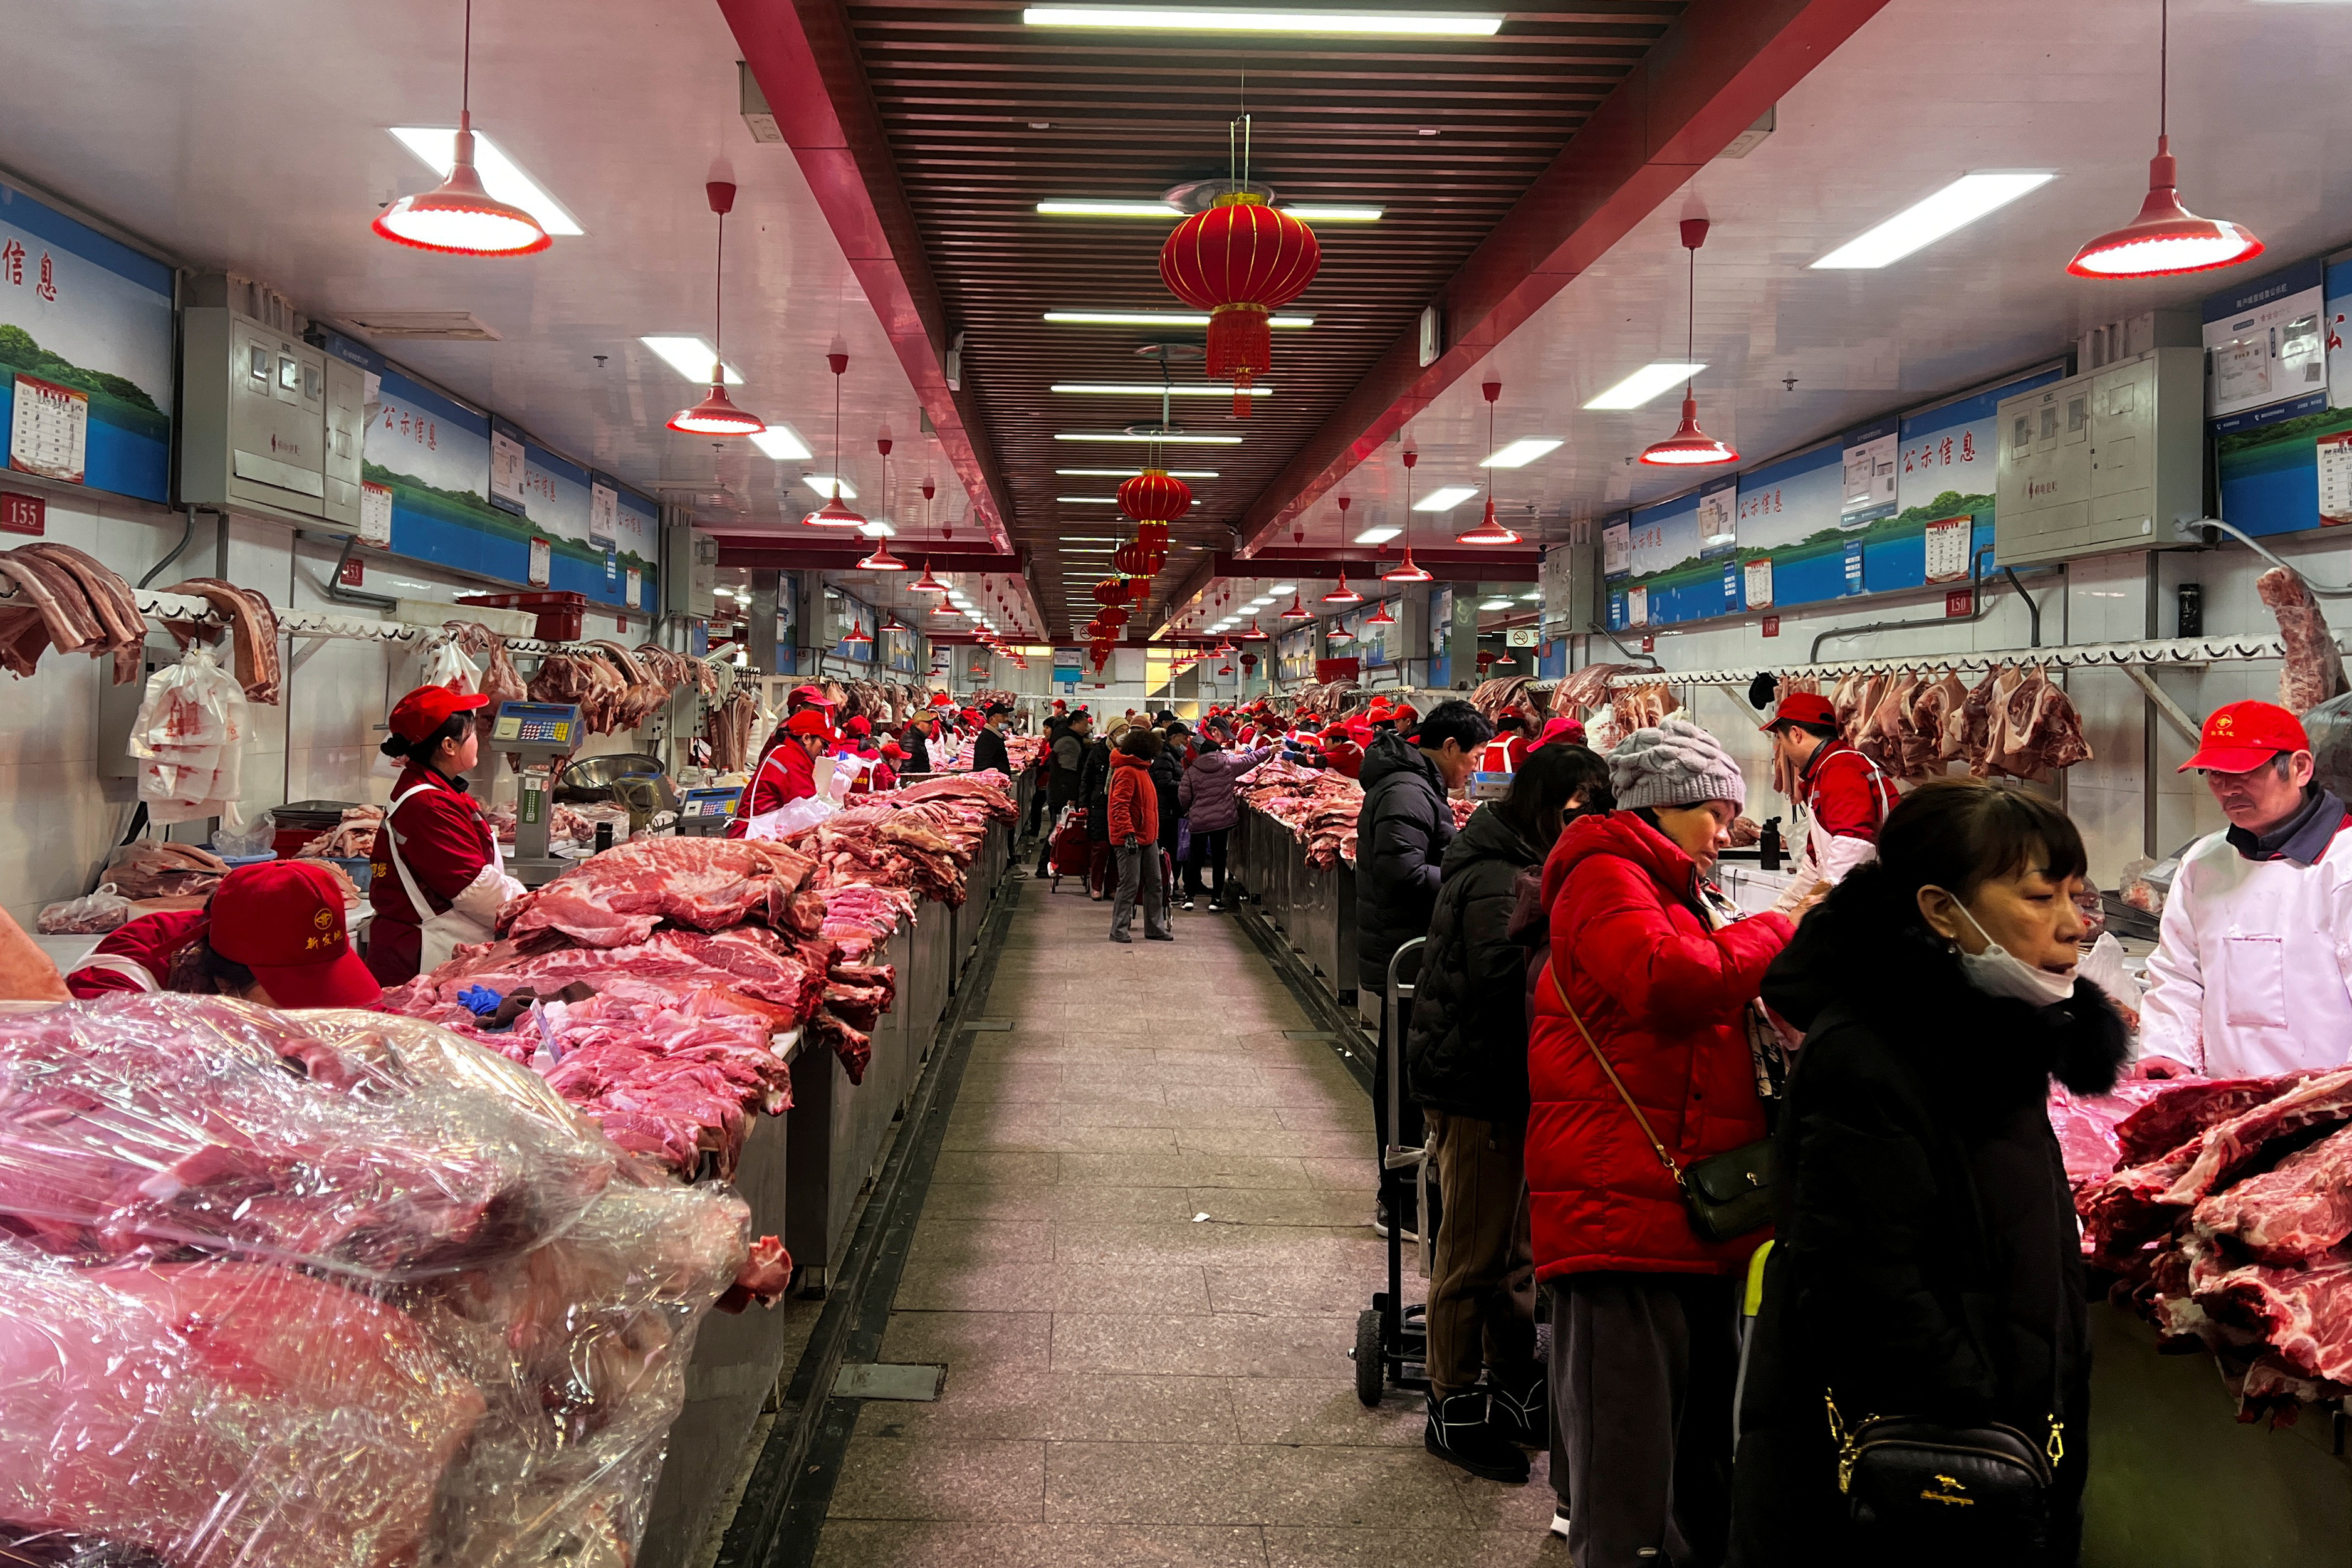 Pork sellers attend to customers at a market in Beijing